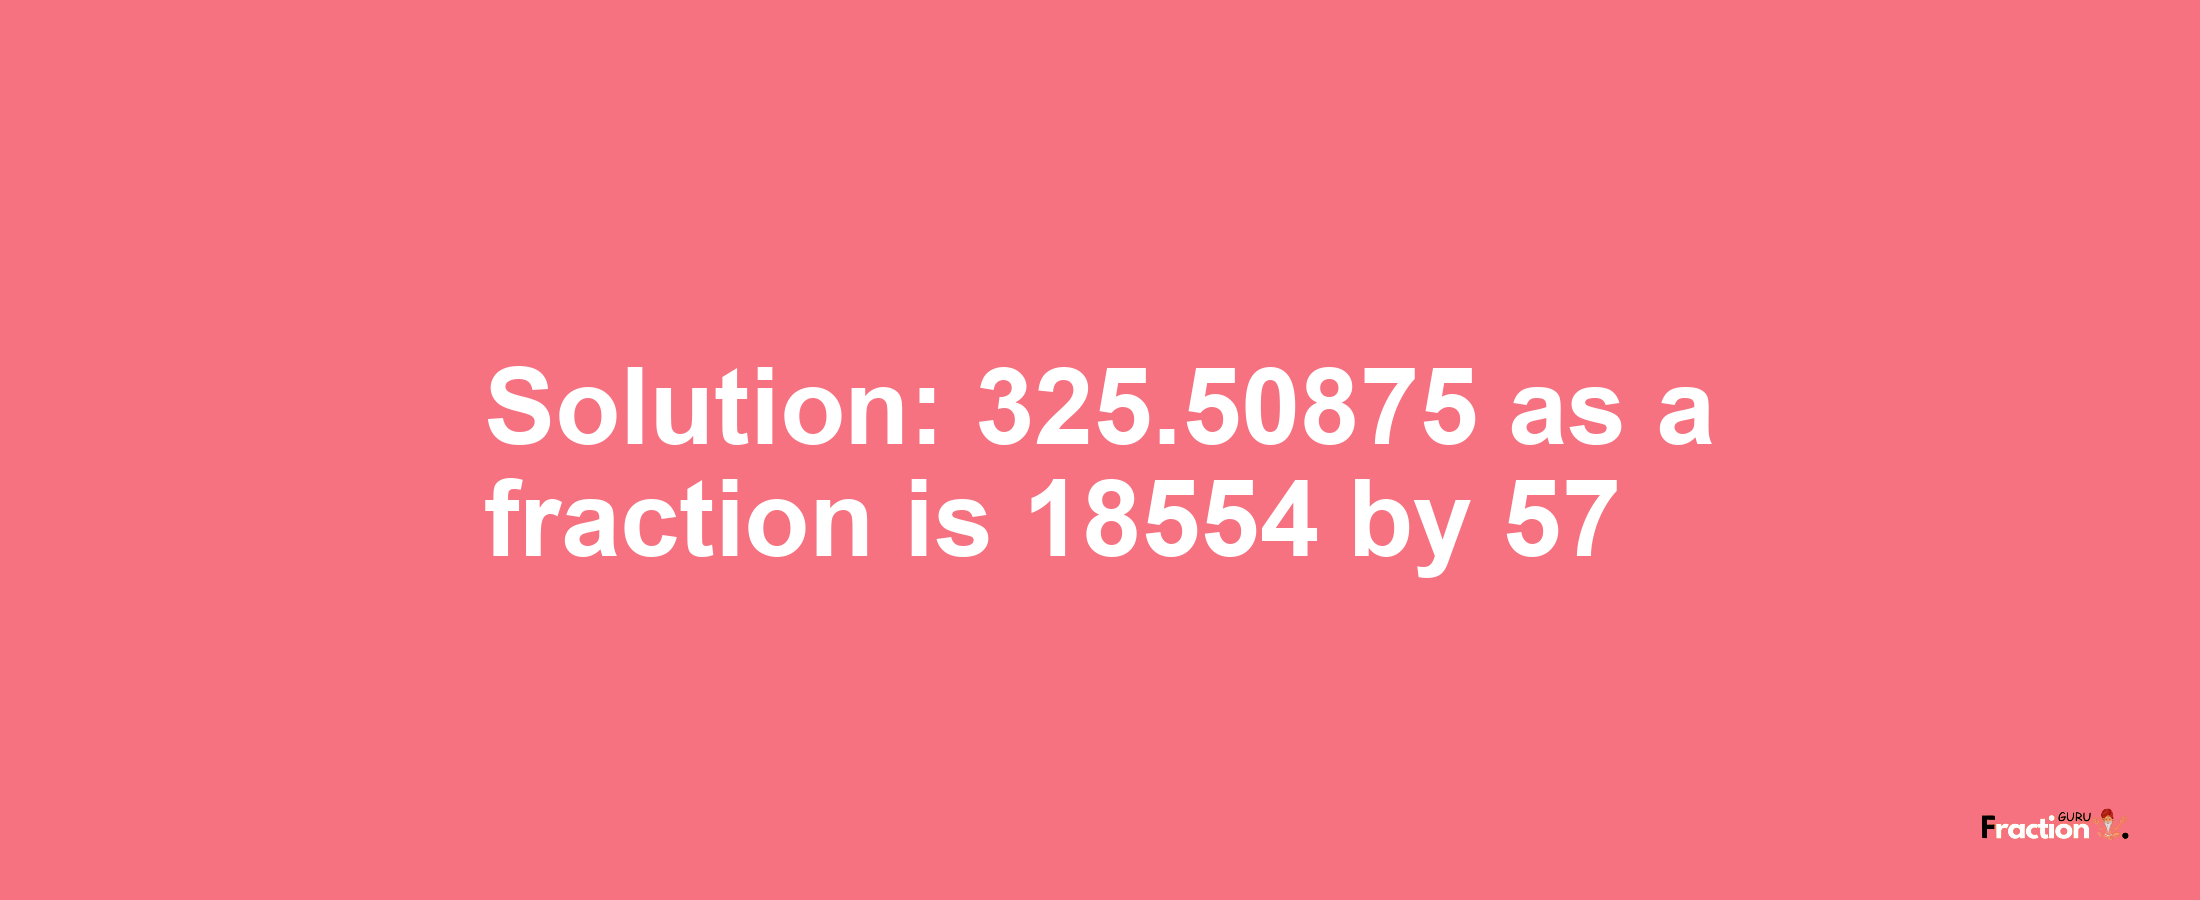 Solution:325.50875 as a fraction is 18554/57